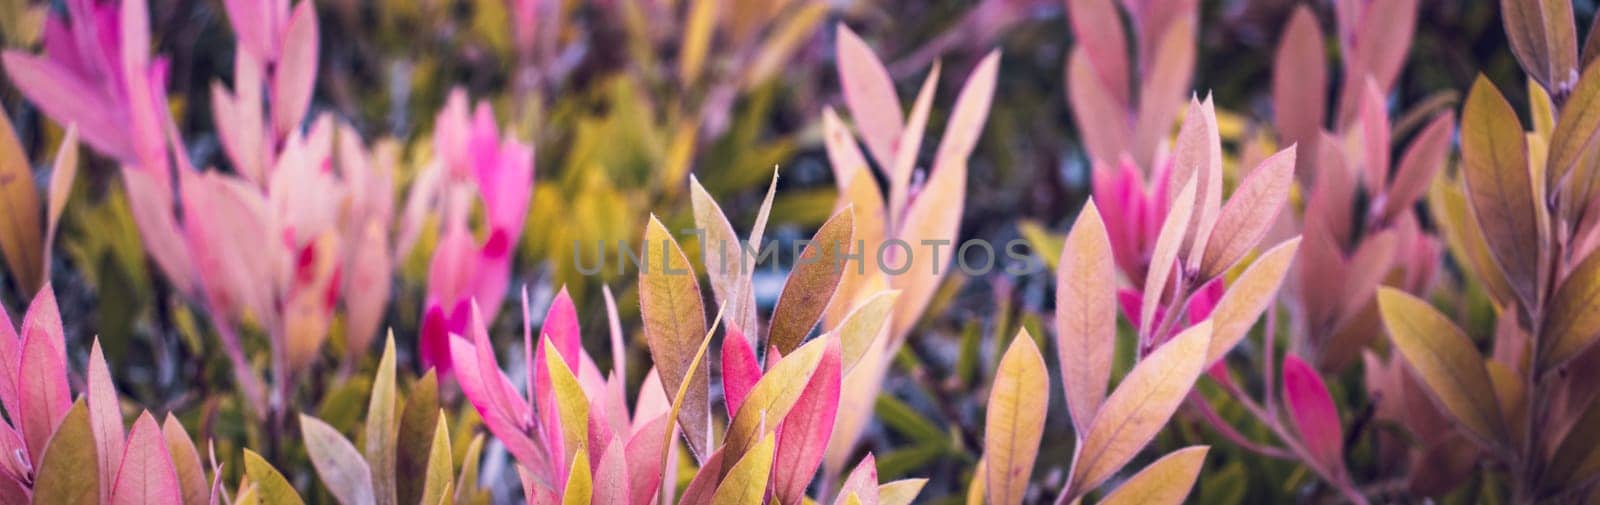 Close up pink leaves autumnal shrub photo. Colorful Euonymus bush in the garden concept photography by _Nataly_Nati_